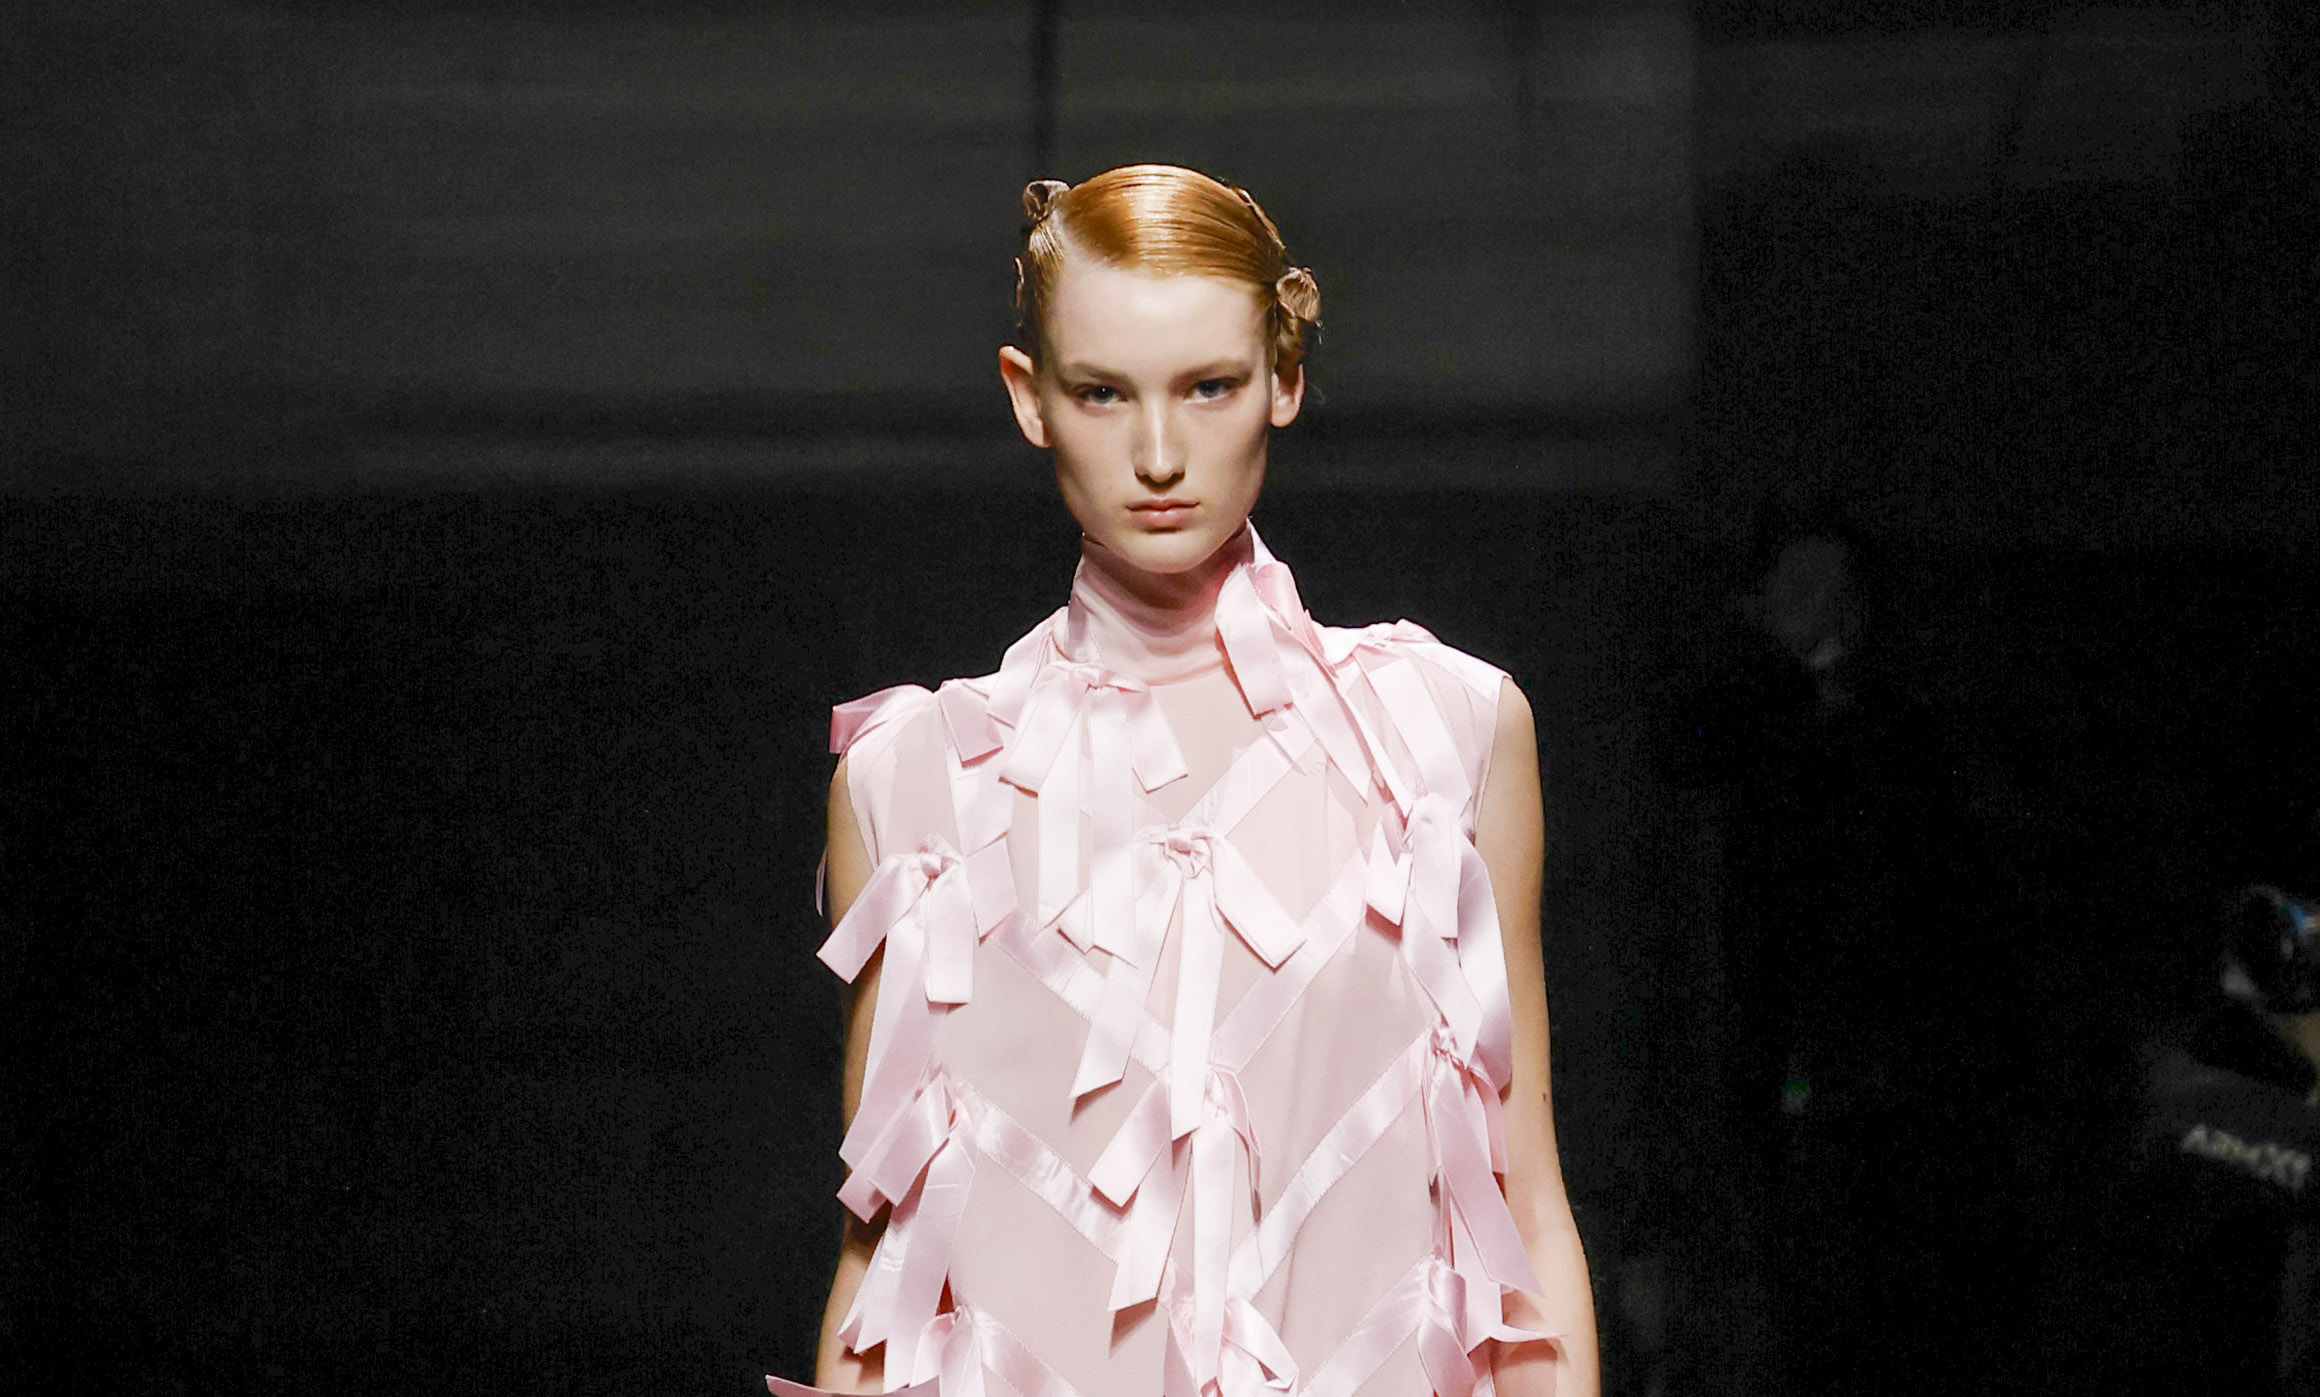 A model showcases a Prada Fall/Winter 2024 collection piece on the runway, featuring a pale pink sleeveless dress adorned with ribbon-like details, complemented by a high neck and structured silhouette.